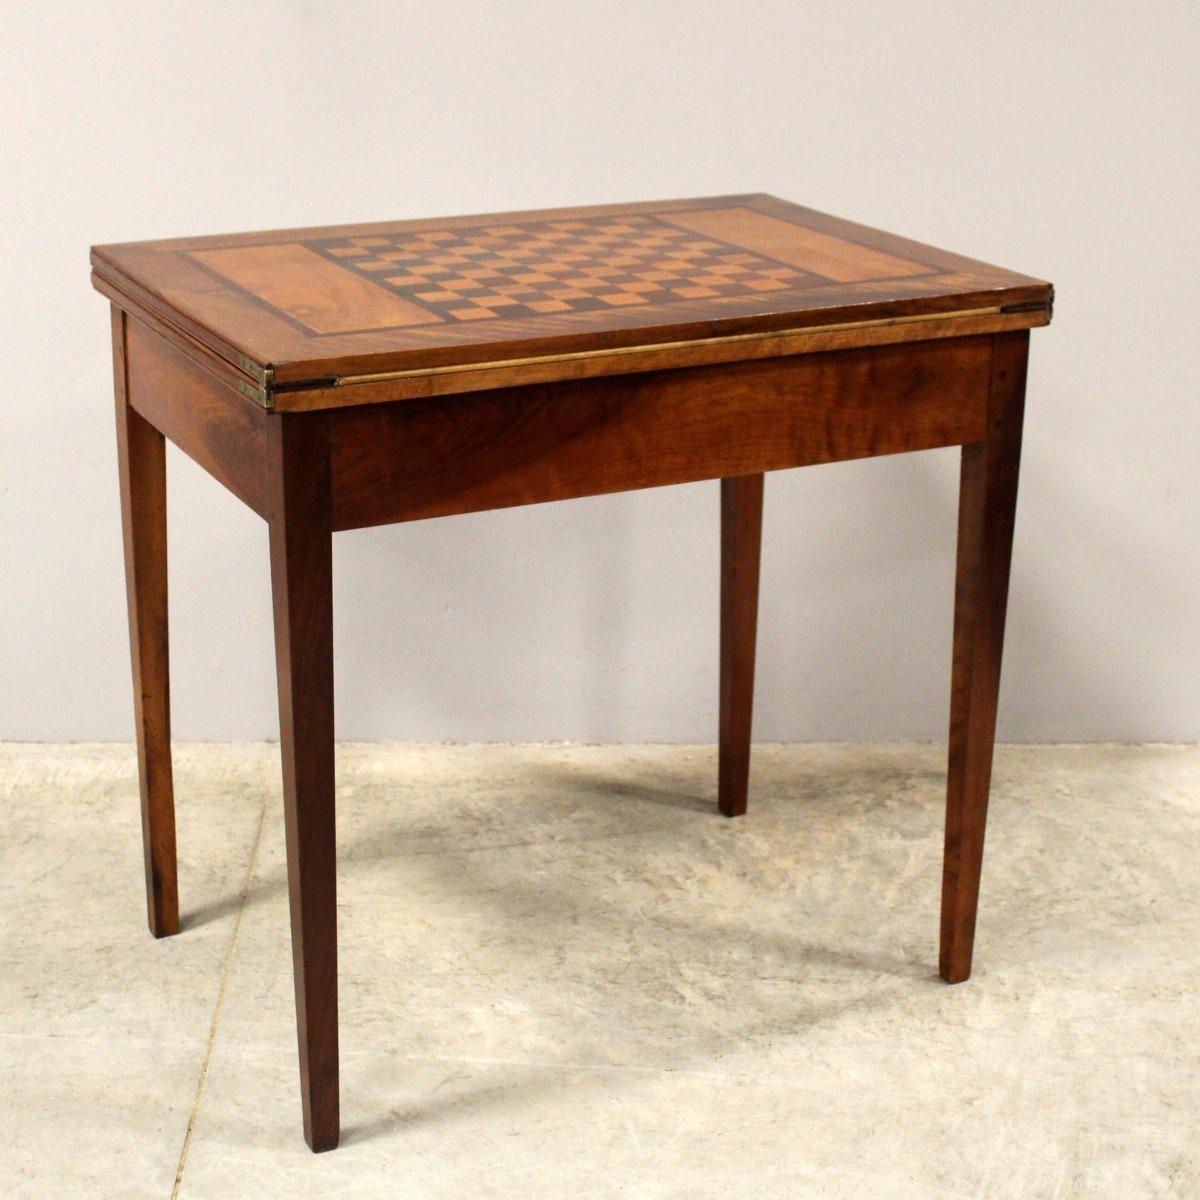 An Italian walnut and mahogany game table from the 19th century with checkerboard marquetry sliding top and tapering legs. Behold a statement of Italian craftsmanship—this 19th-century Italian walnut and mahogany game table captivates with its